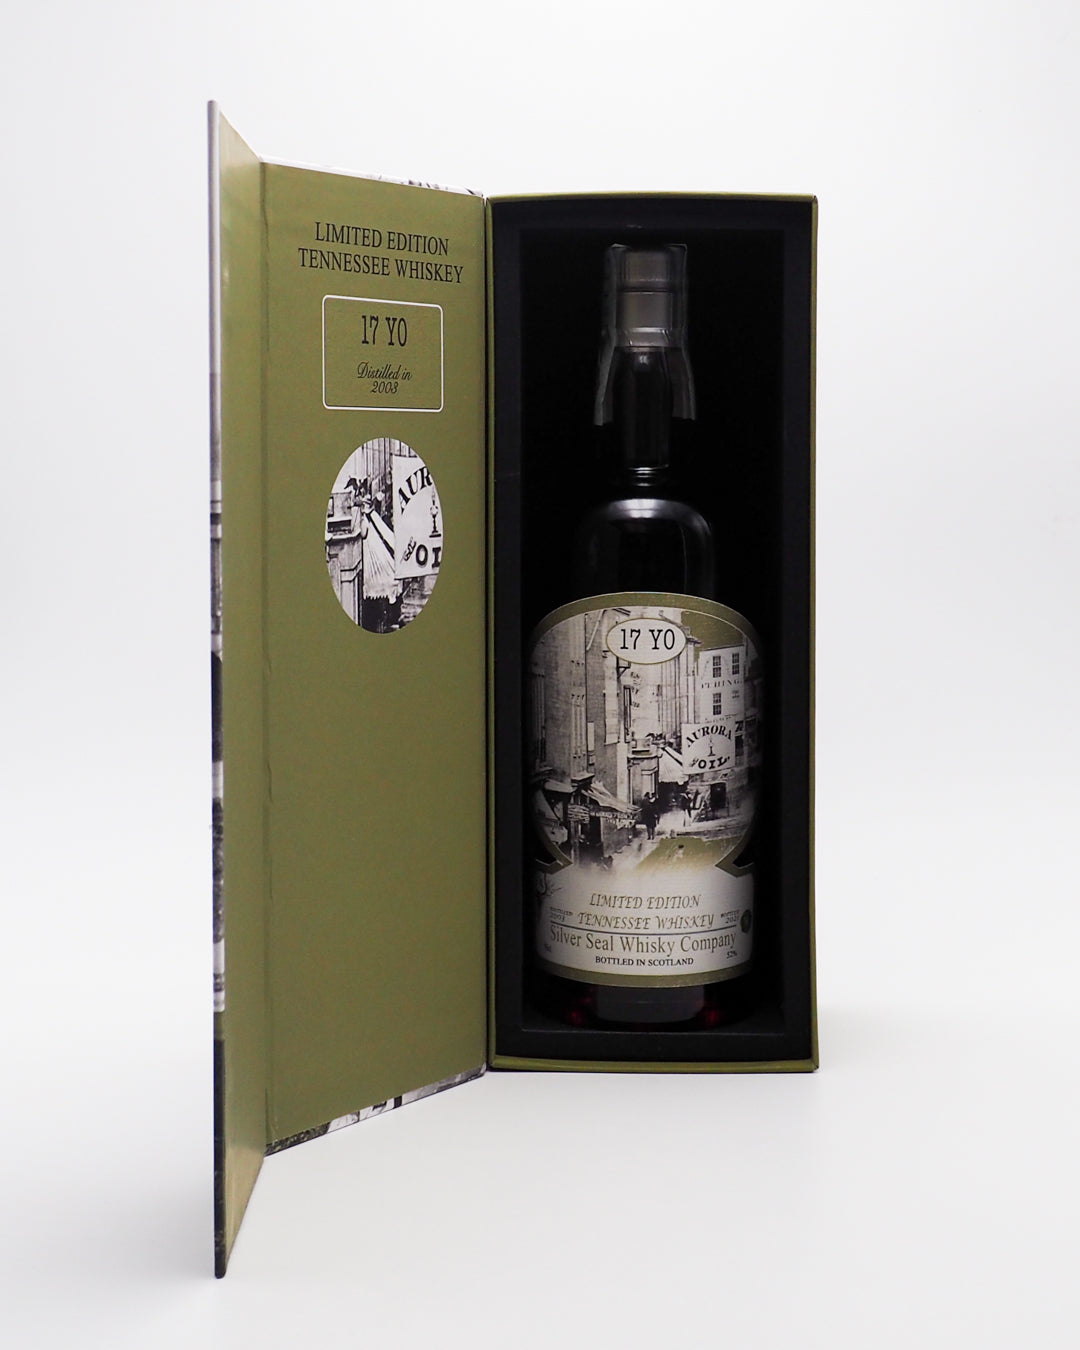 whisky-silver-seal-2003-limited-edition